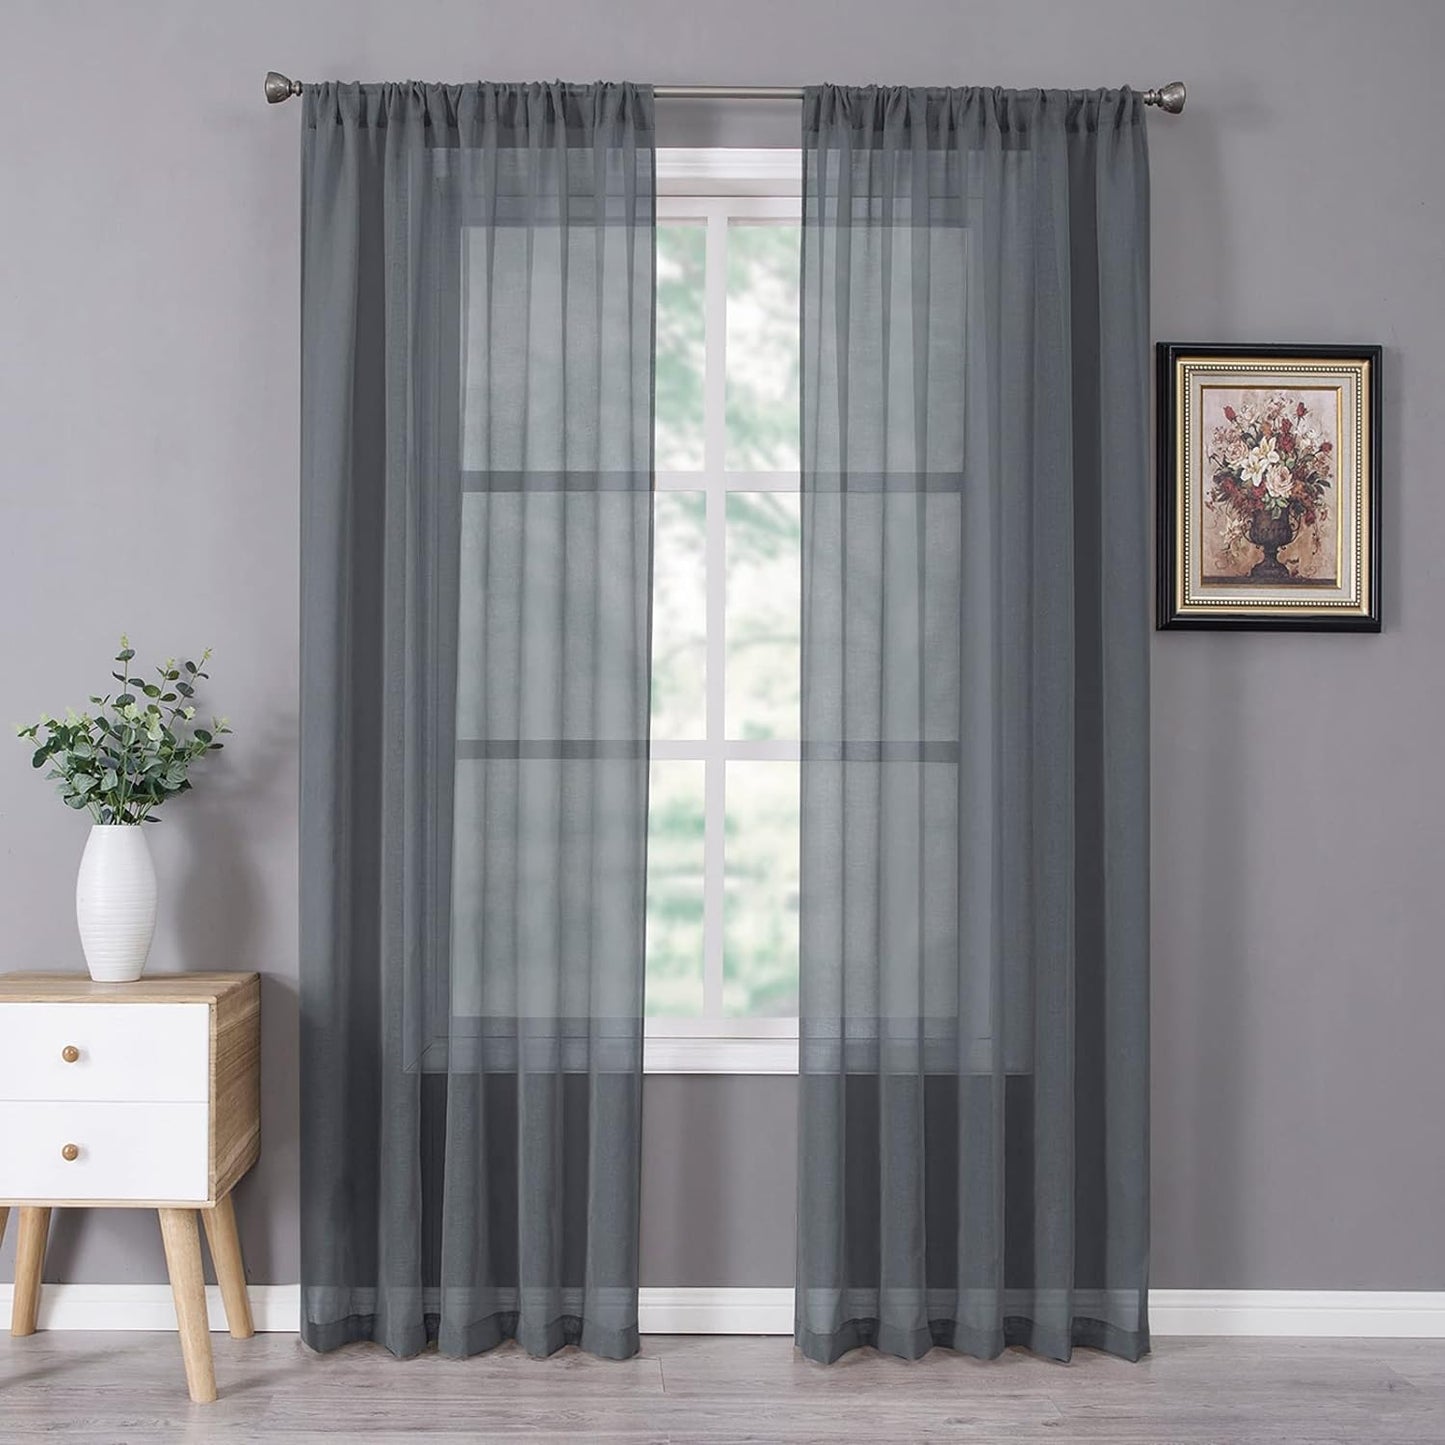 Tollpiz Short Sheer Curtains Linen Textured Bedroom Curtain Sheers Light Filtering Rod Pocket Voile Curtains for Living Room, 54 X 45 Inches Long, White, Set of 2 Panels  Tollpiz Tex Dark Grey 54"W X 72"L 